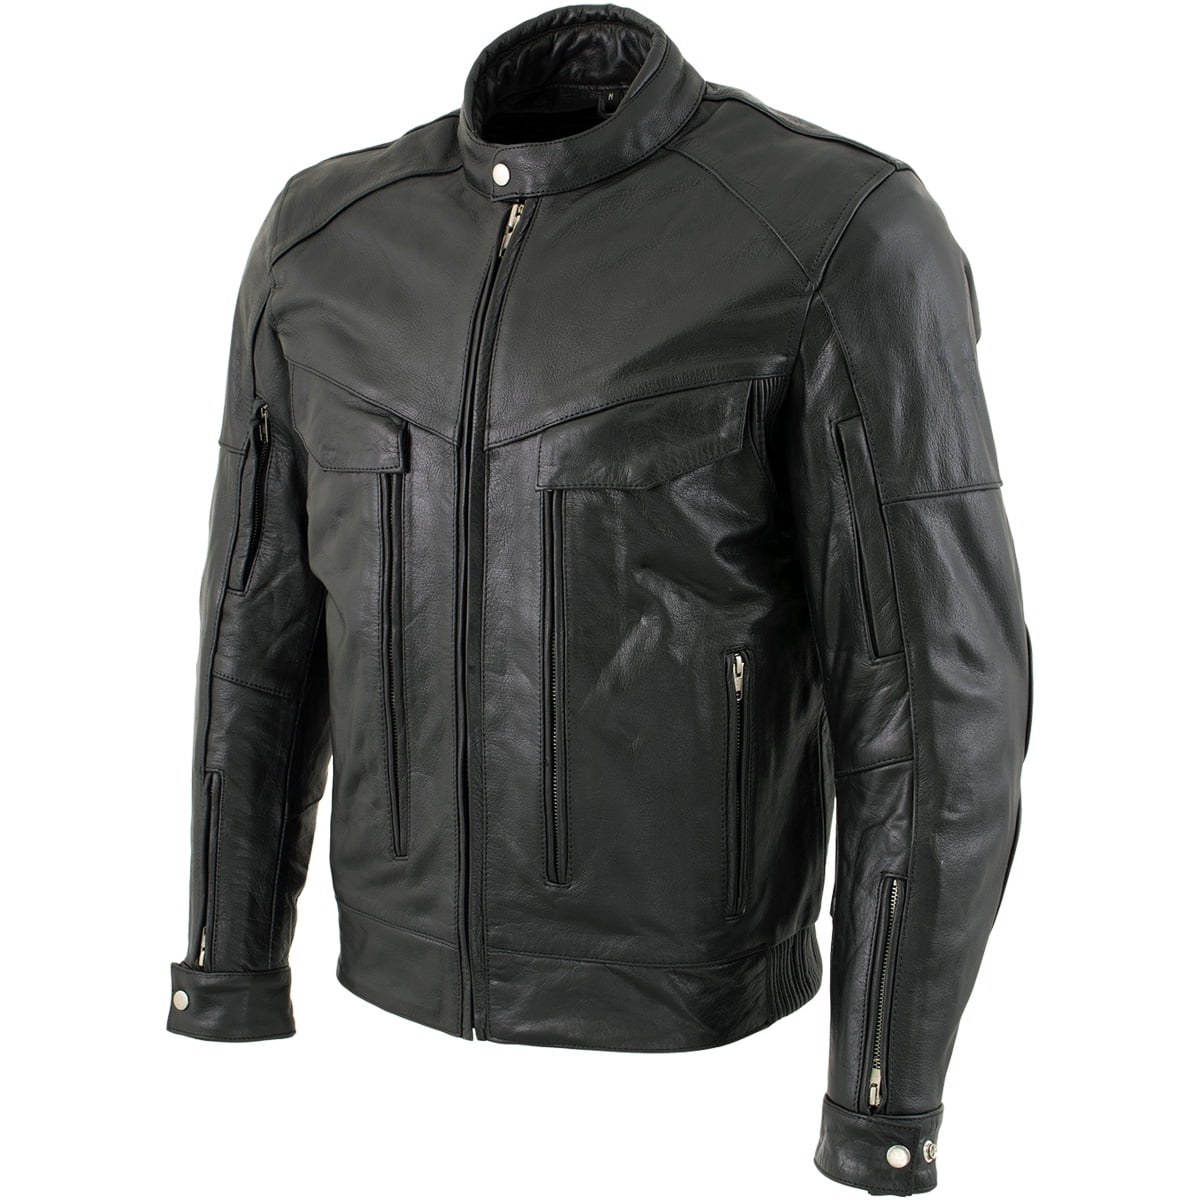 cruiser jacket with armor